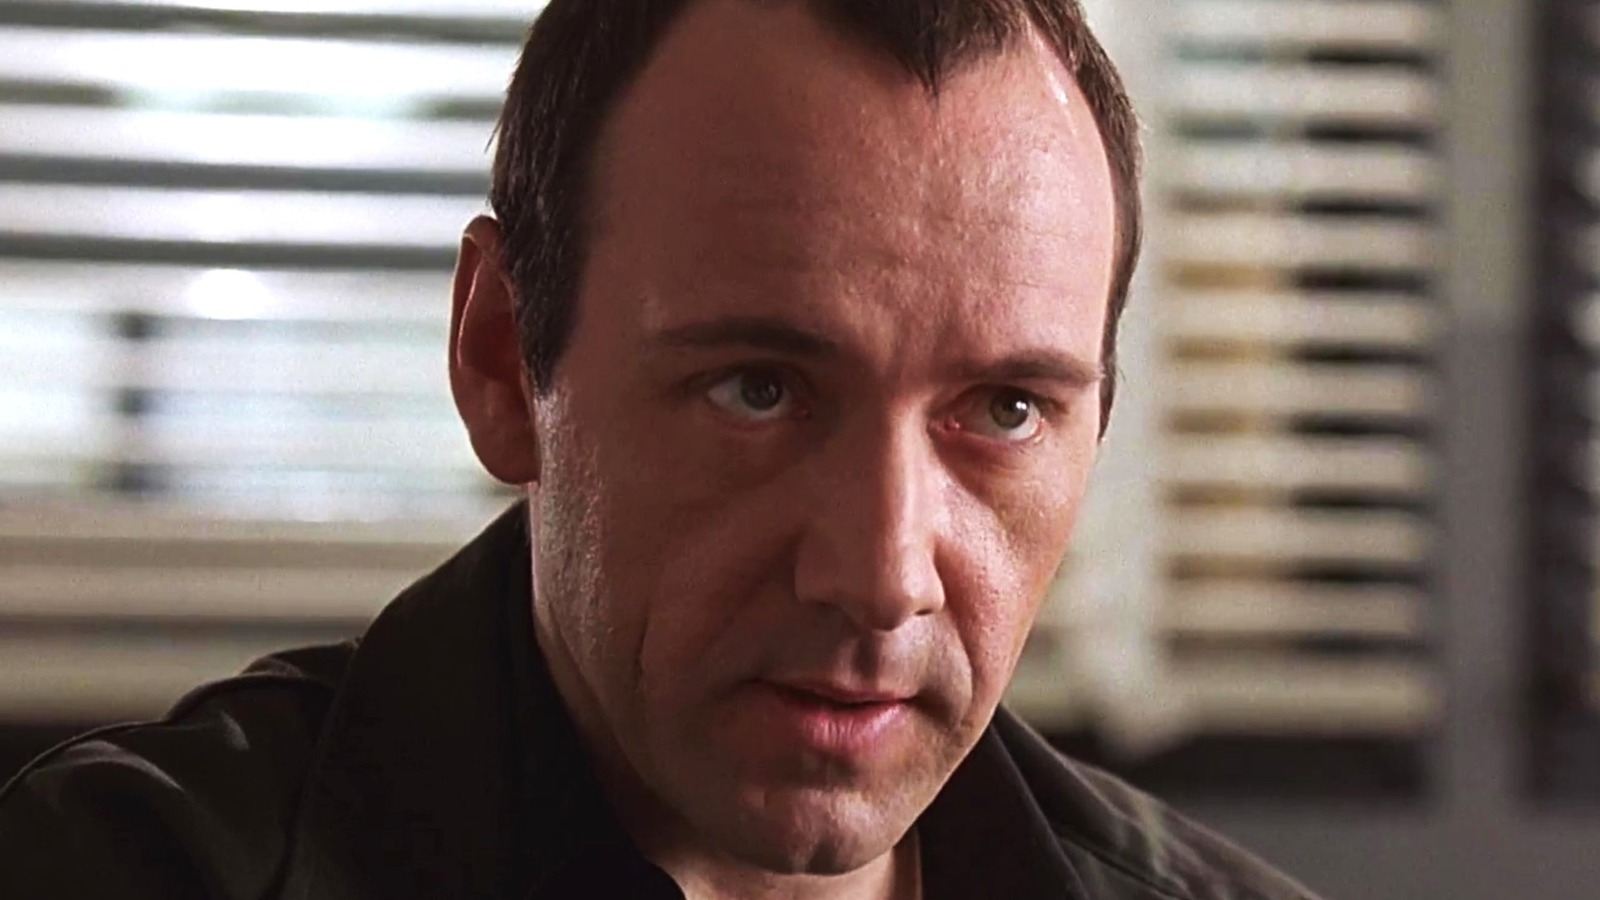 Kinolab Film Clip: Catching Keyser Sozefrom The Usual Suspects